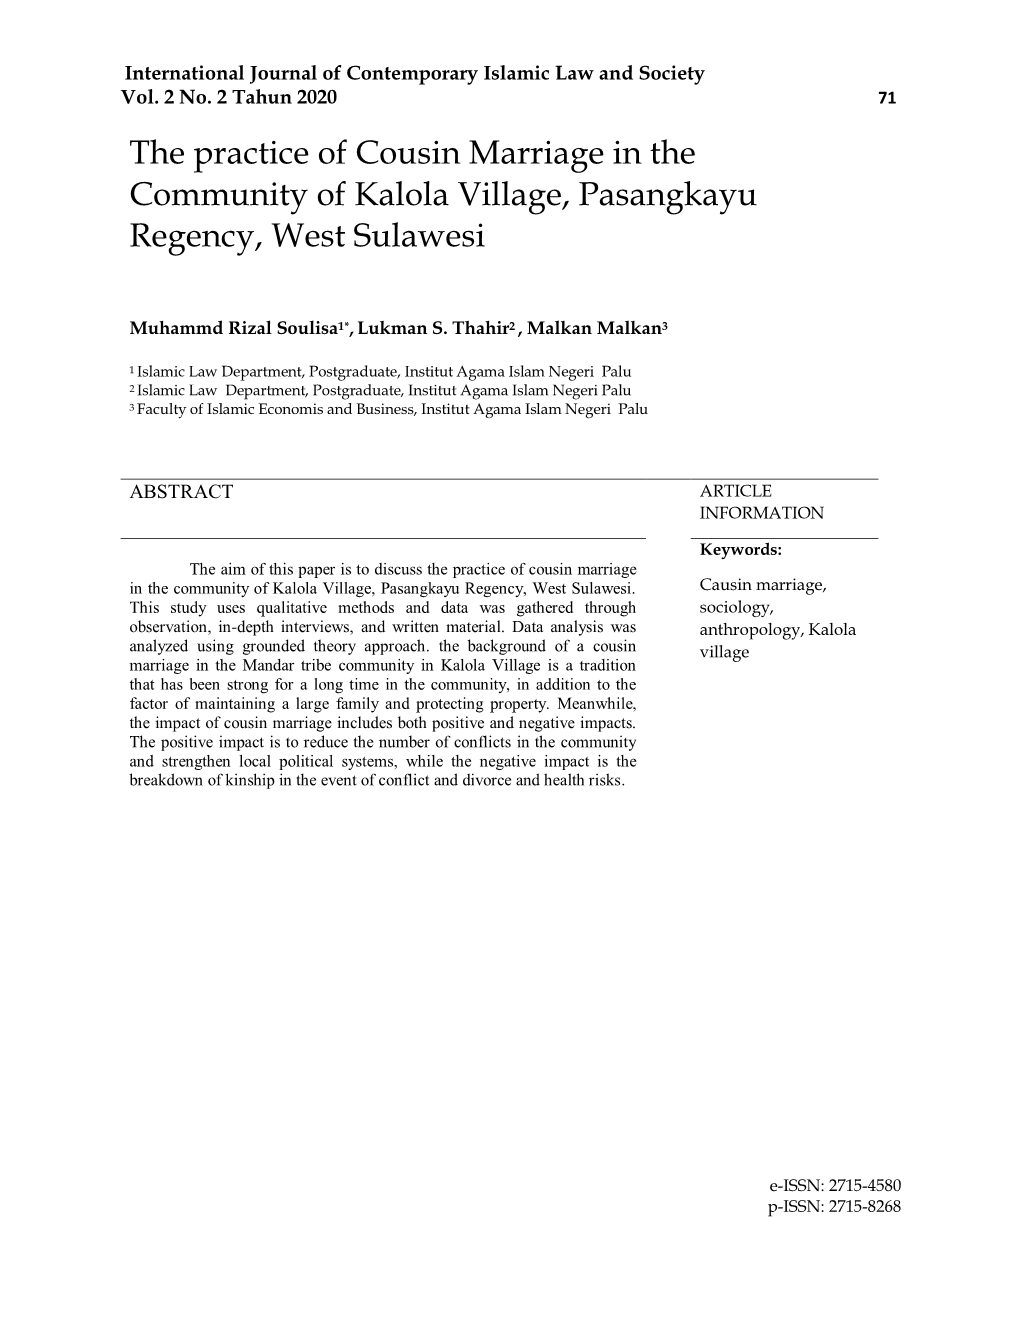 The Practice of Cousin Marriage in the Community of Kalola Village, Pasangkayu Regency, West Sulawesi